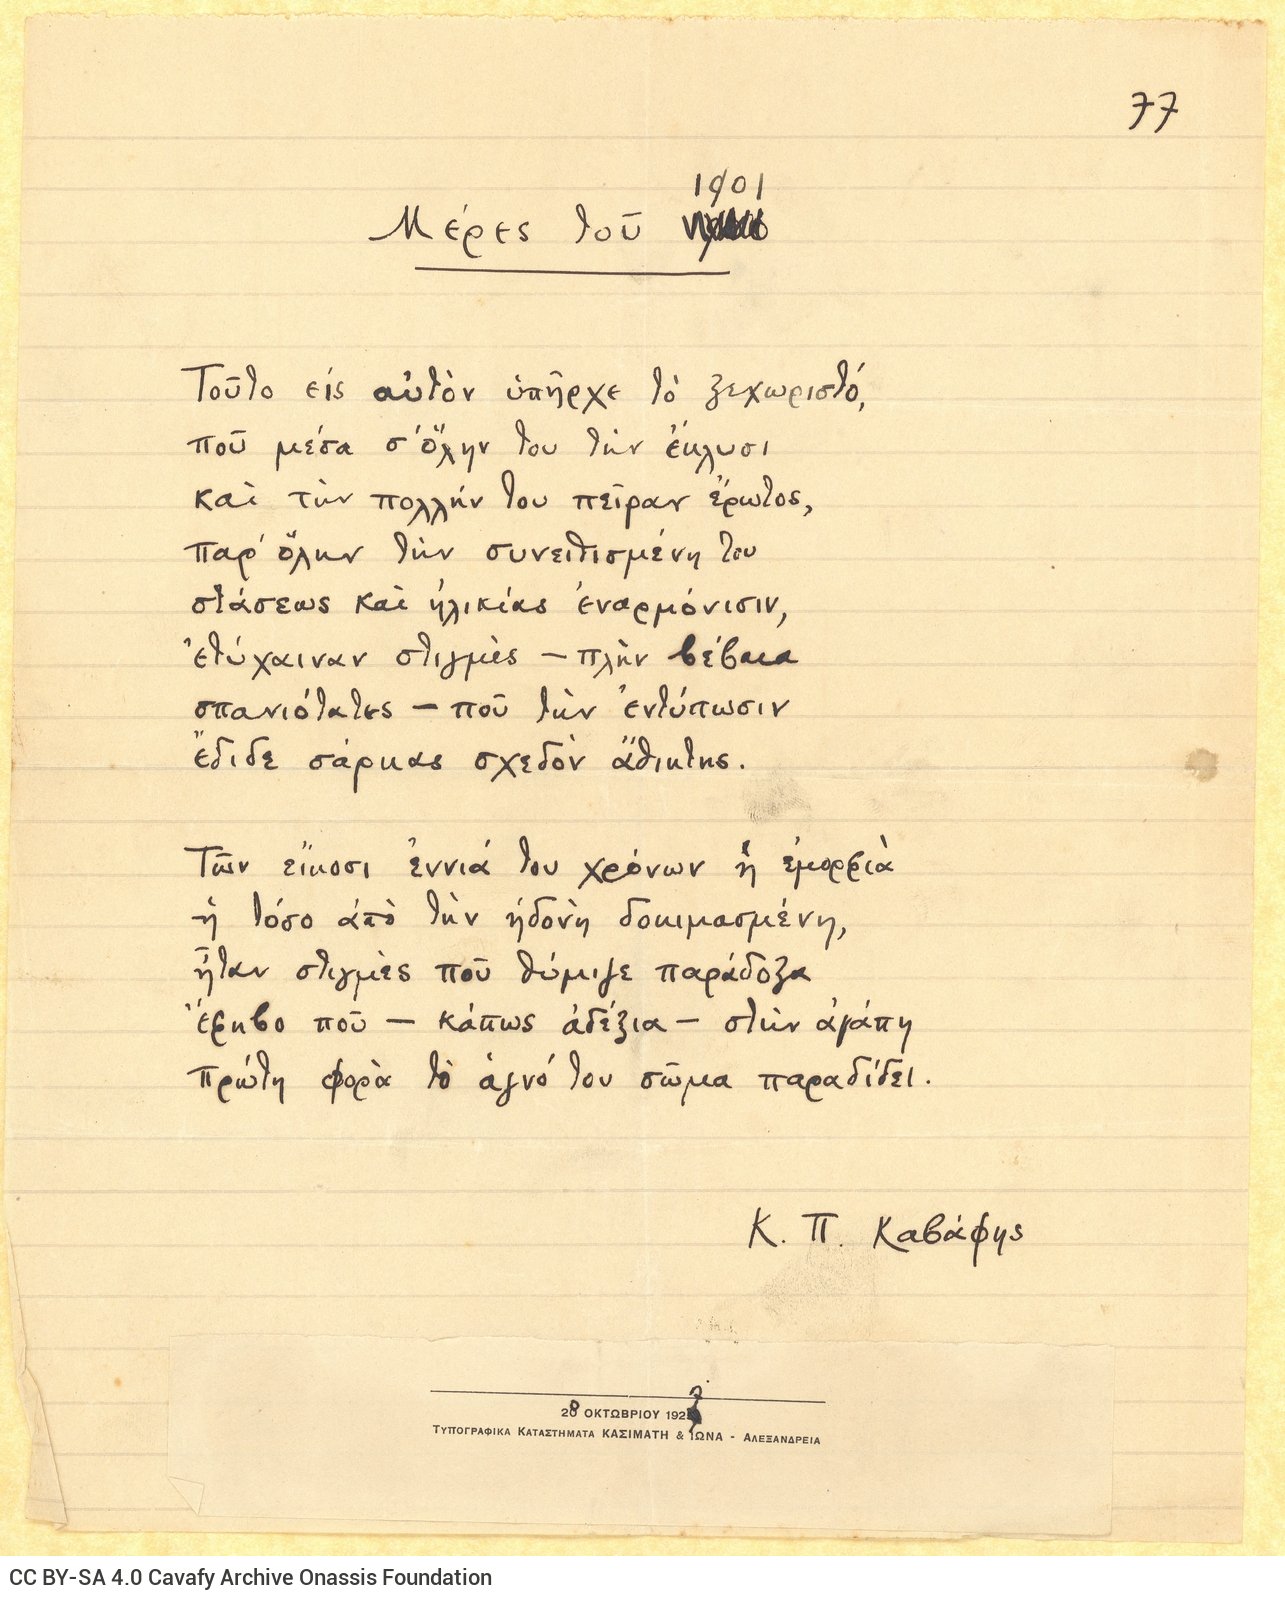 Autograph manuscript of the poem "Days of 1901" on one side of a ruled sheet. The date in the title has been crossed out a